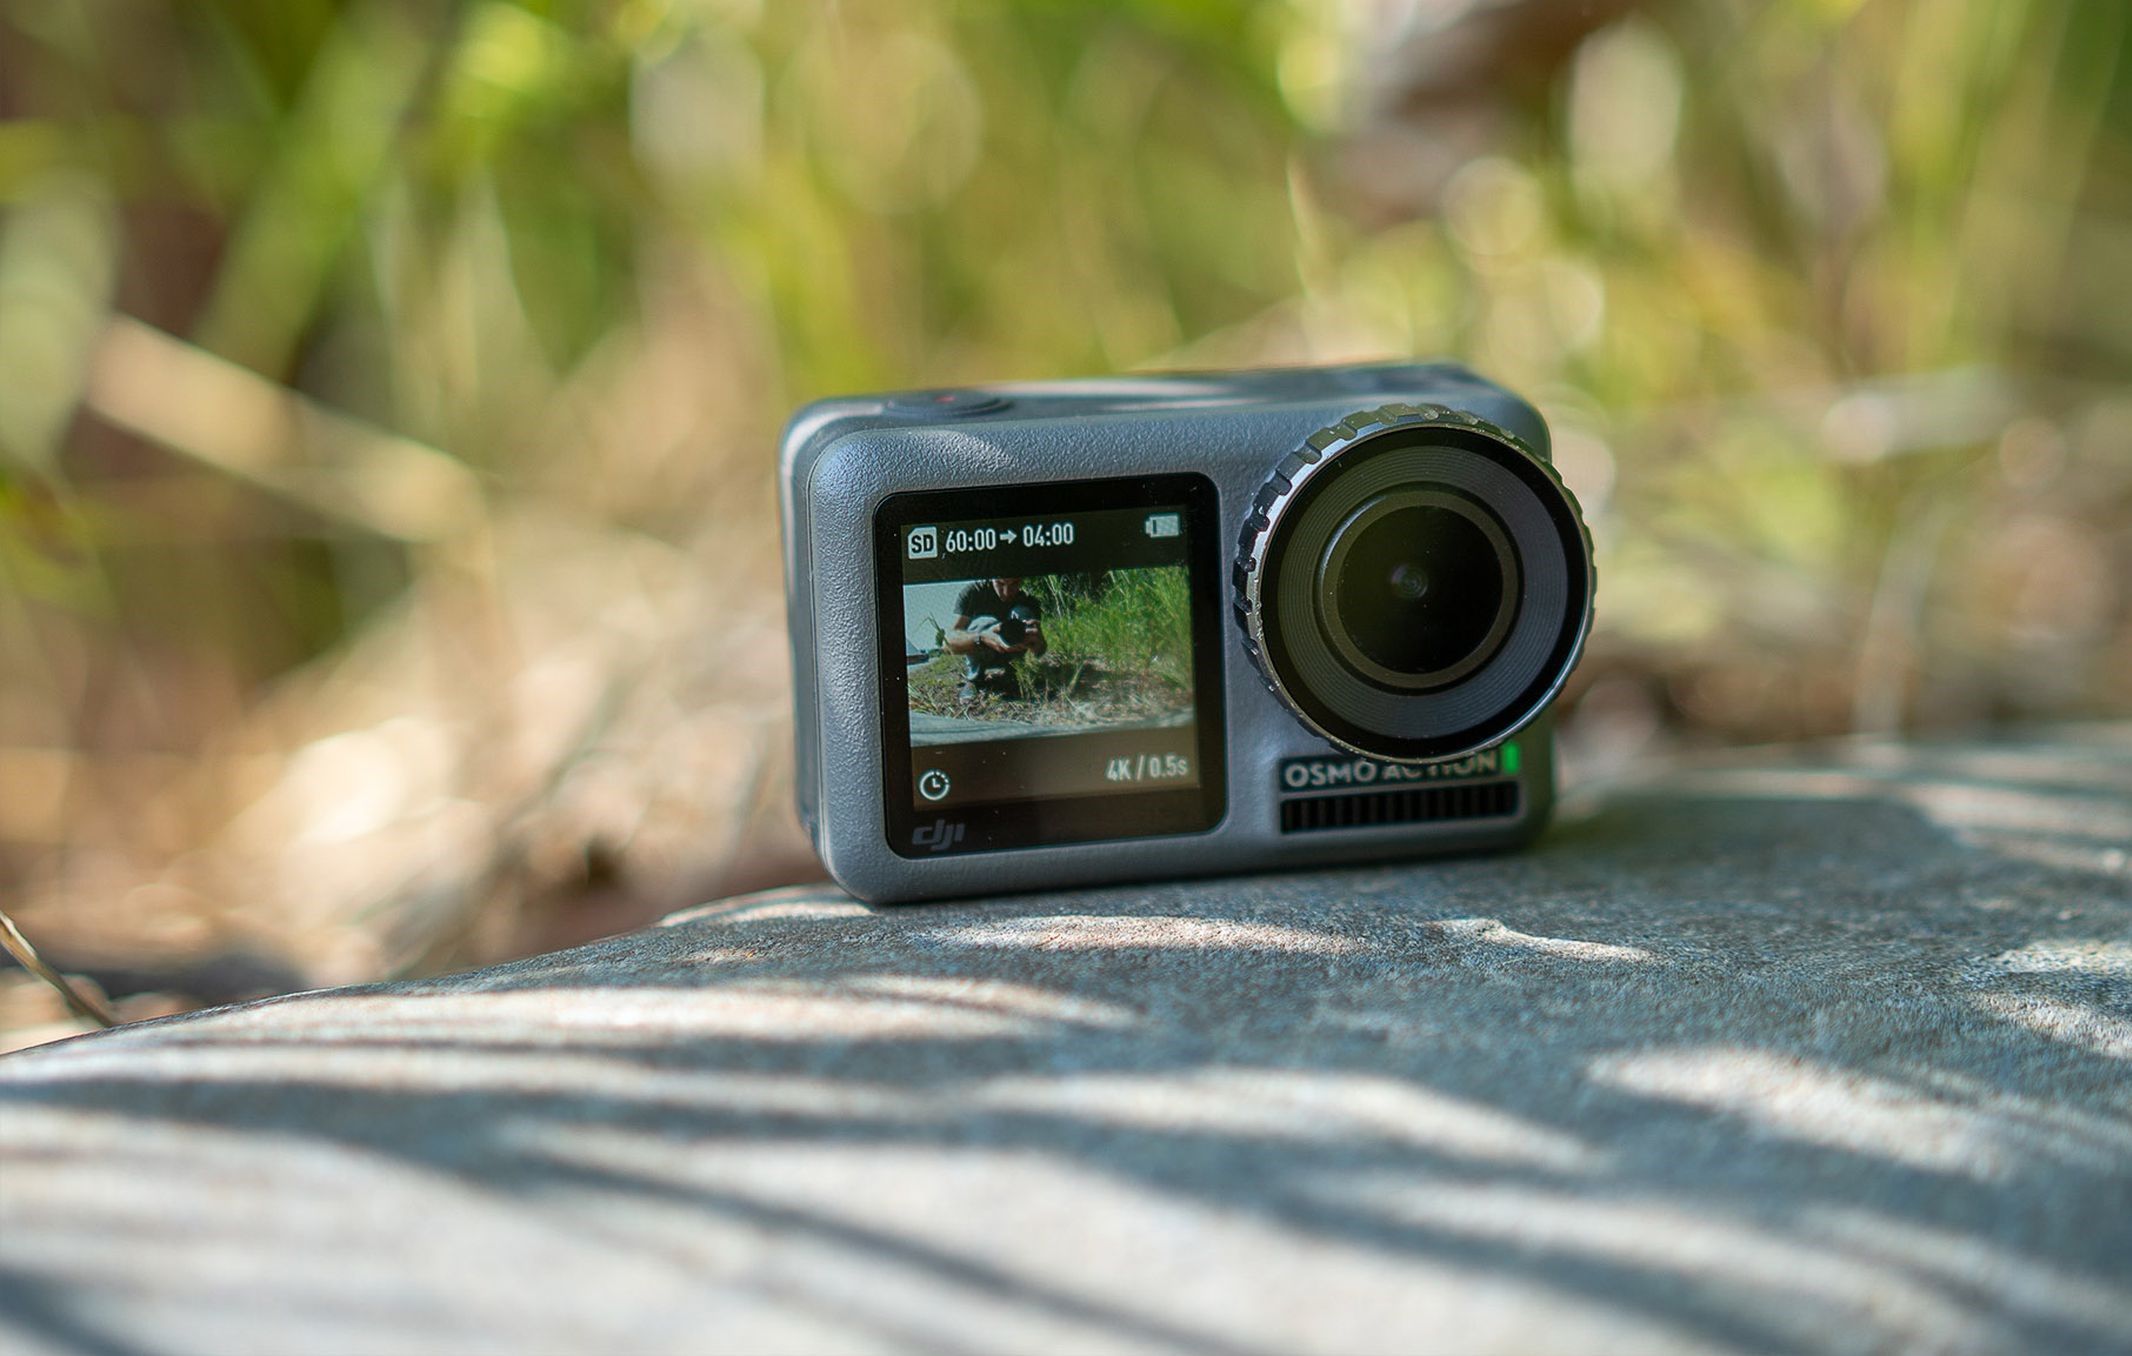 How To Record Video For Action Camera